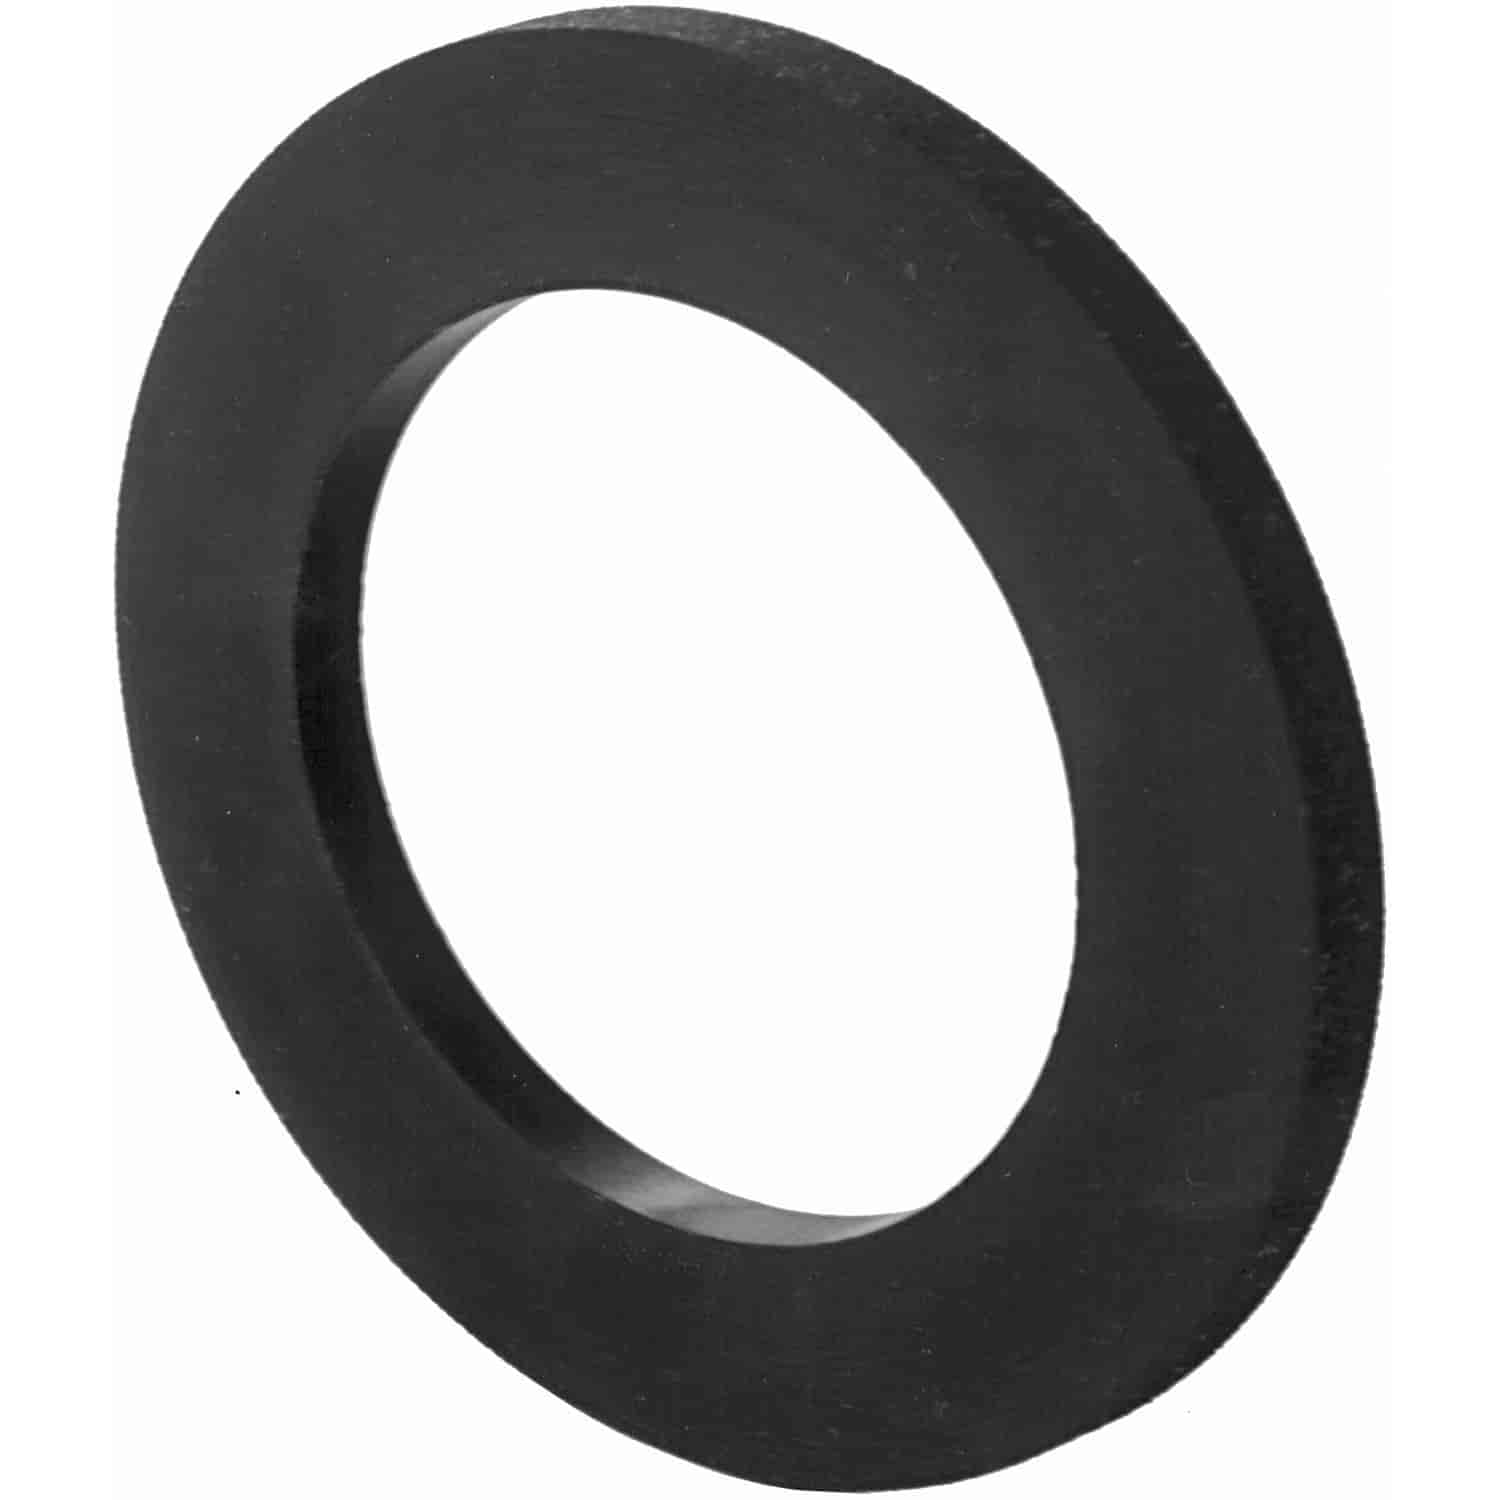 Rubber Gasket for use with 31412